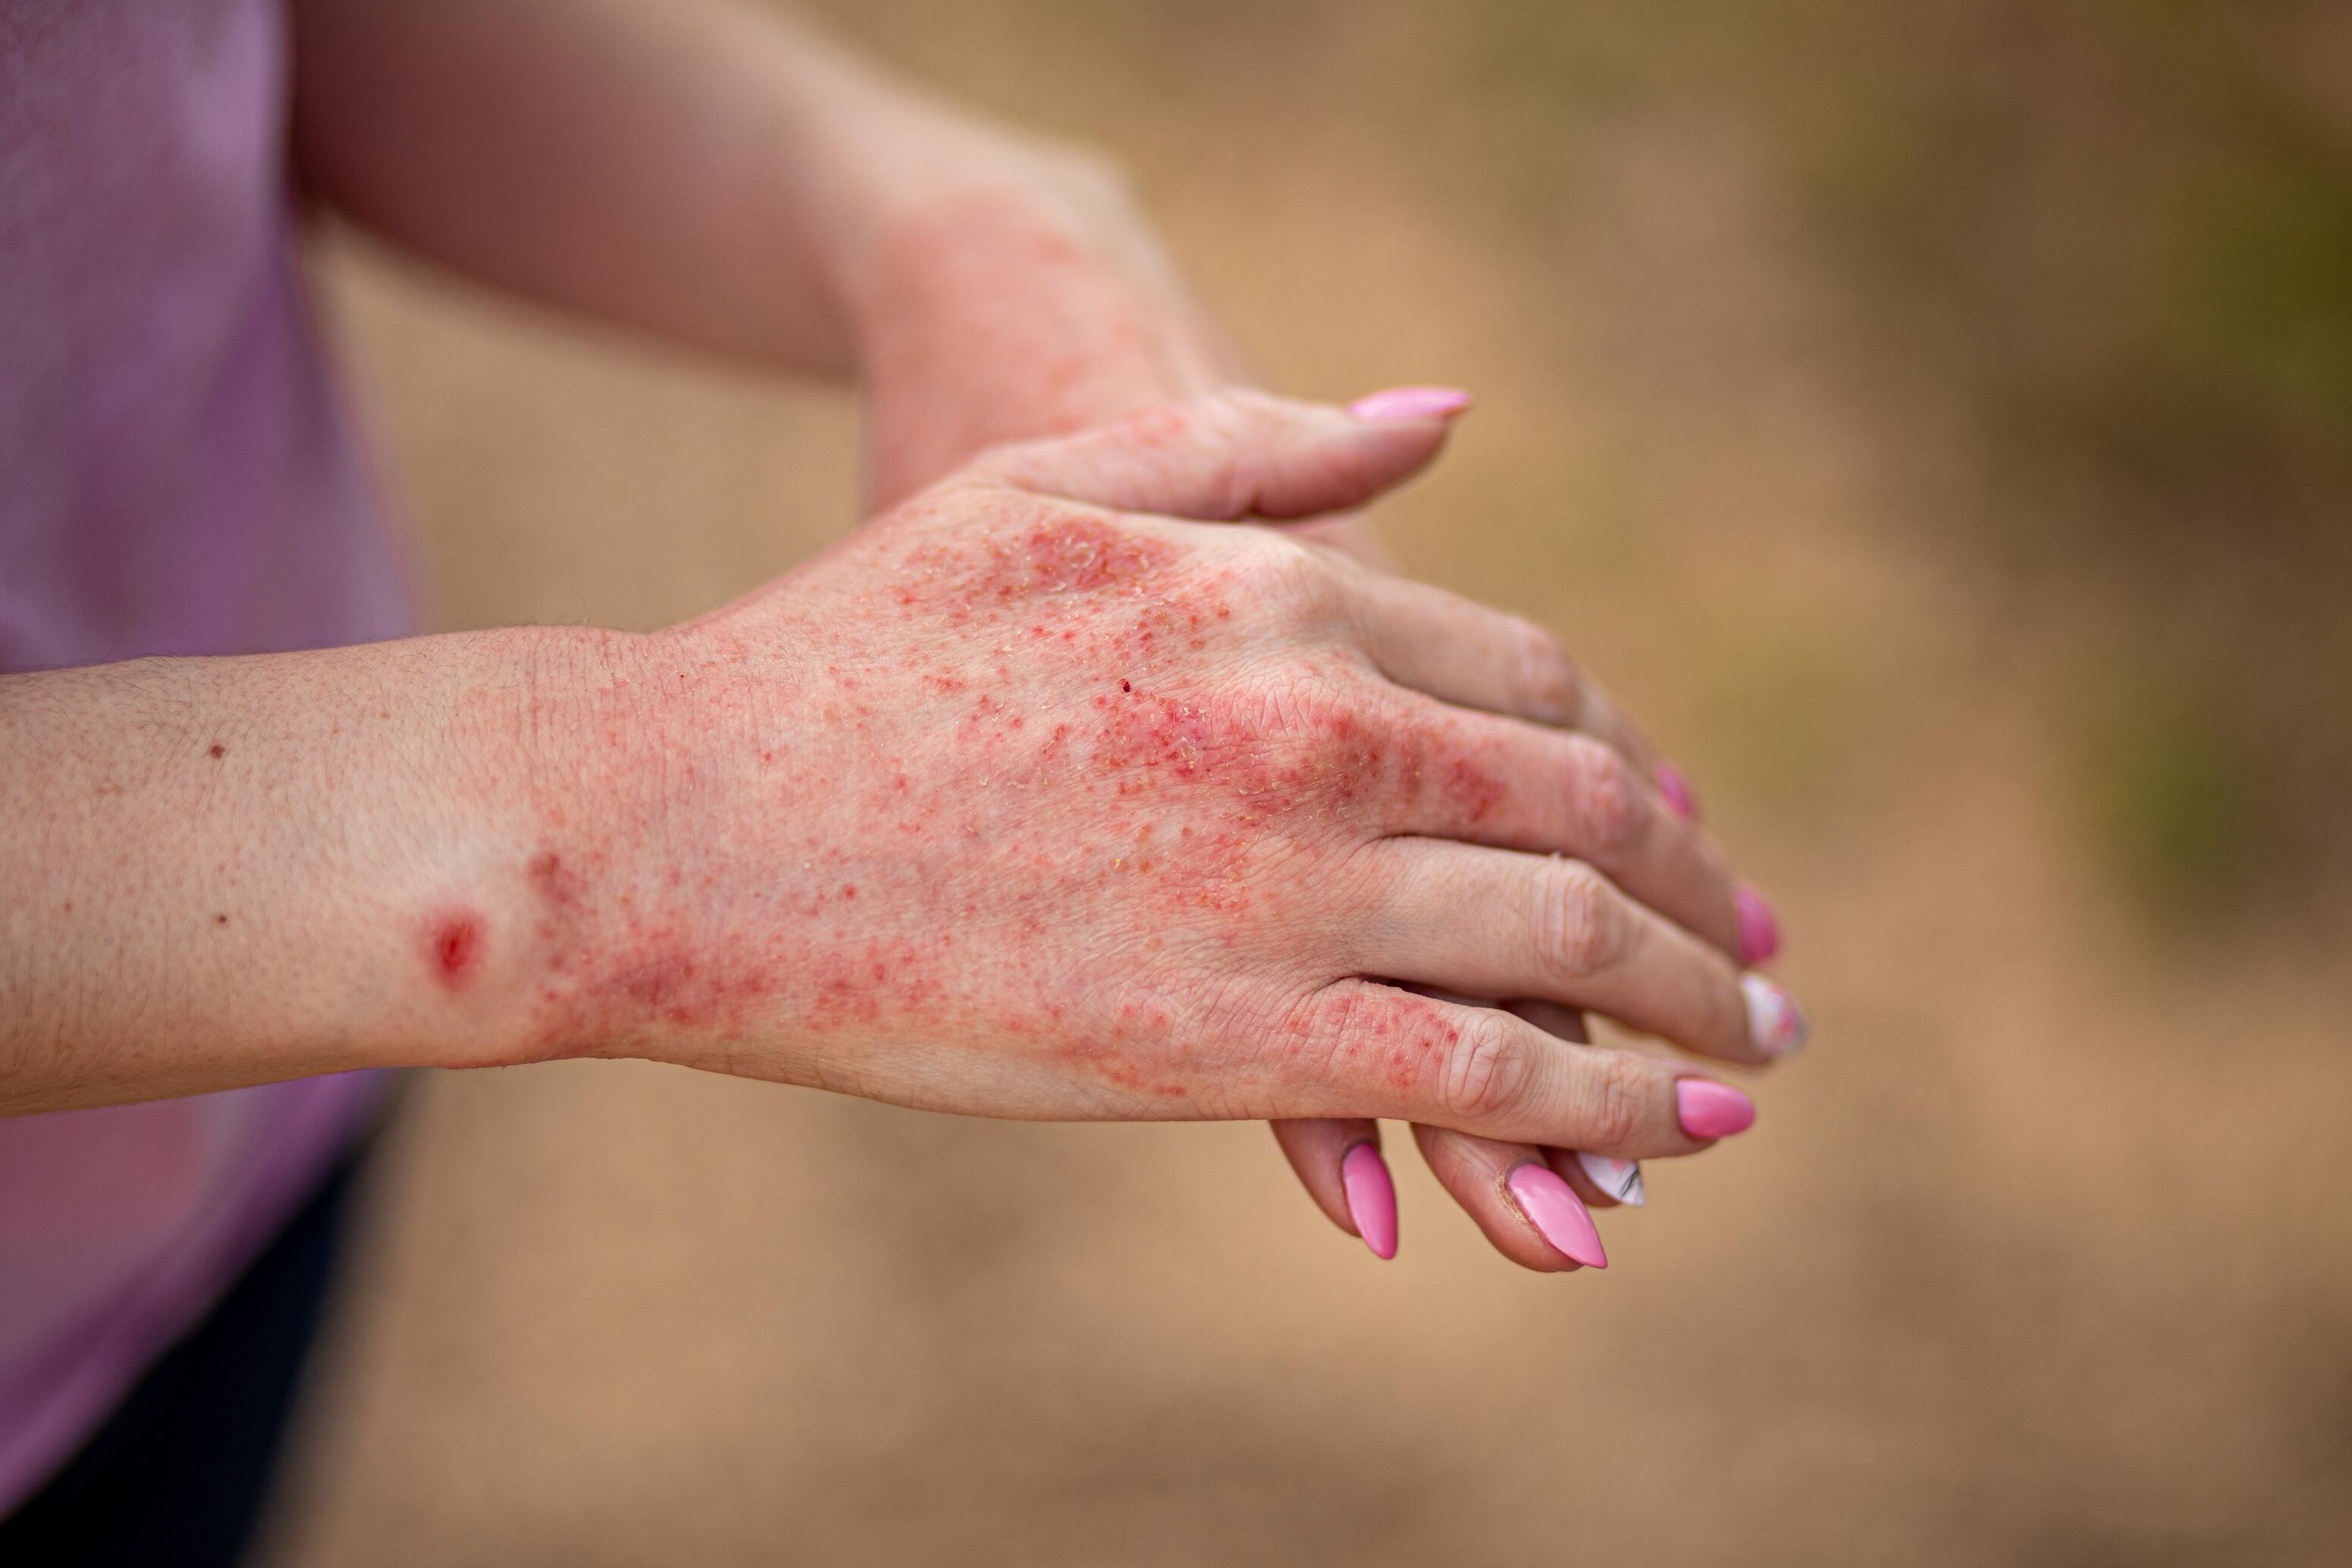 Woman with atopic eczema on her hands